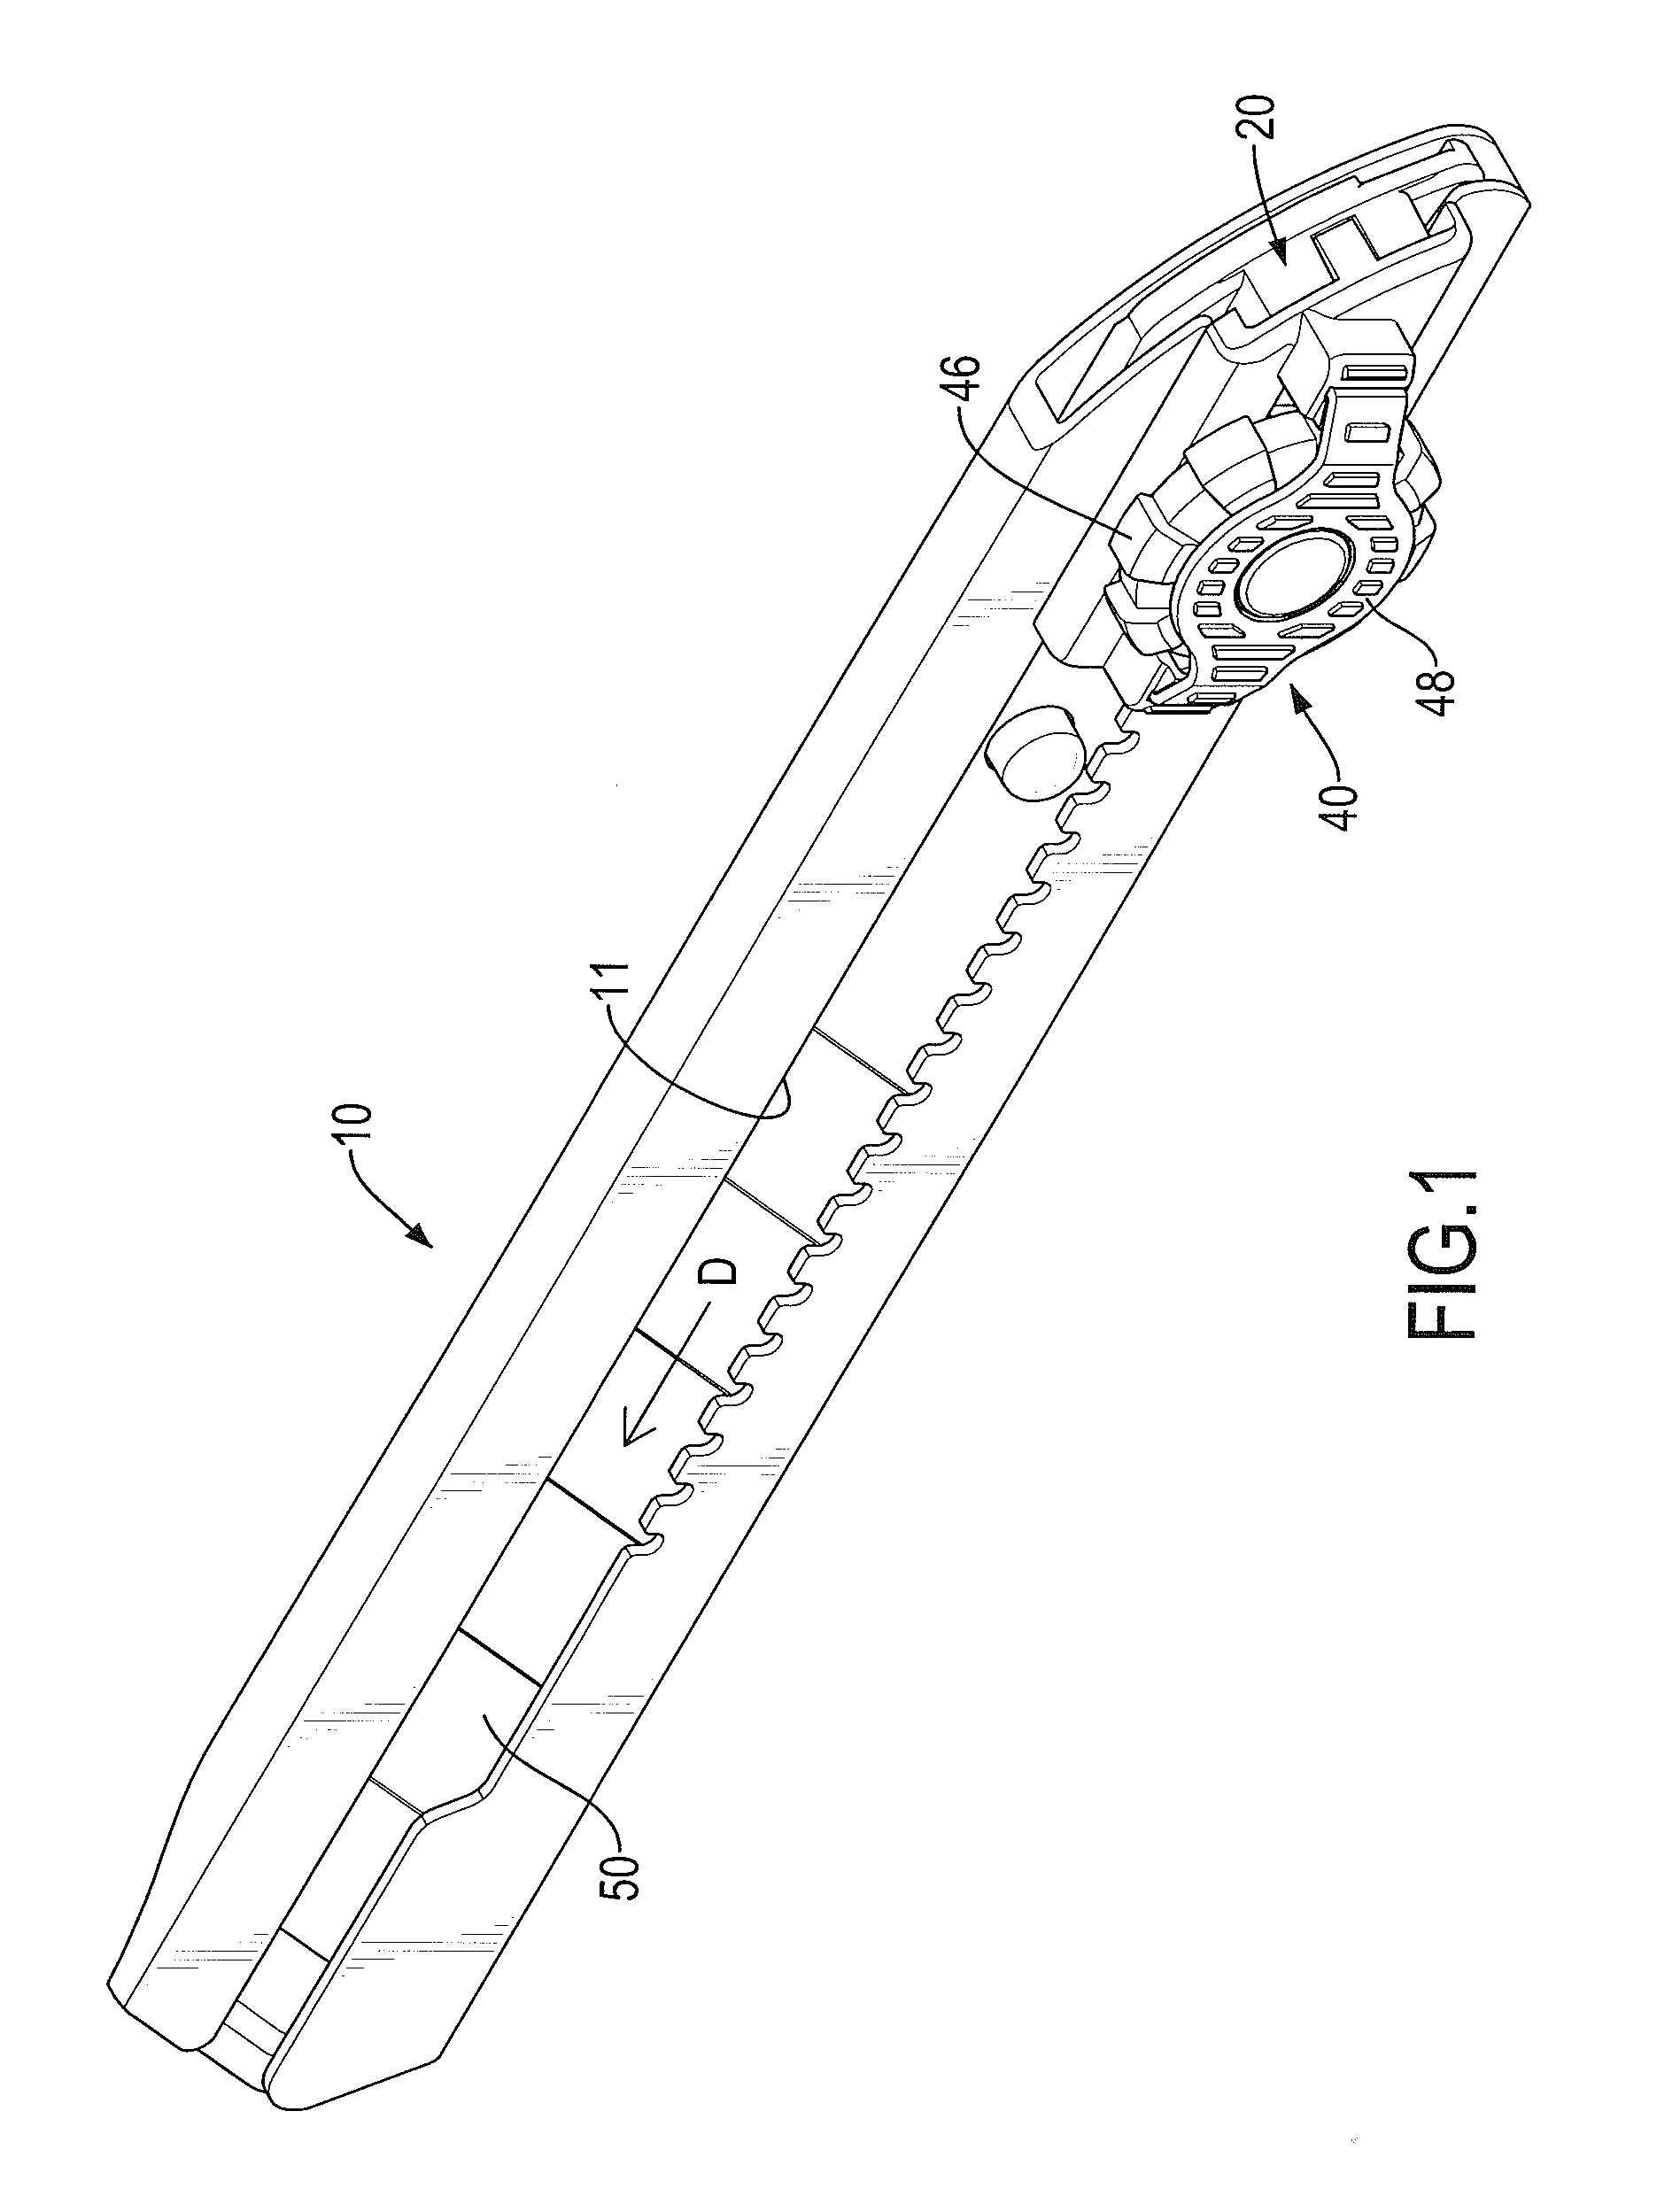 Cutter Assembly Having a Screw-Locking Device